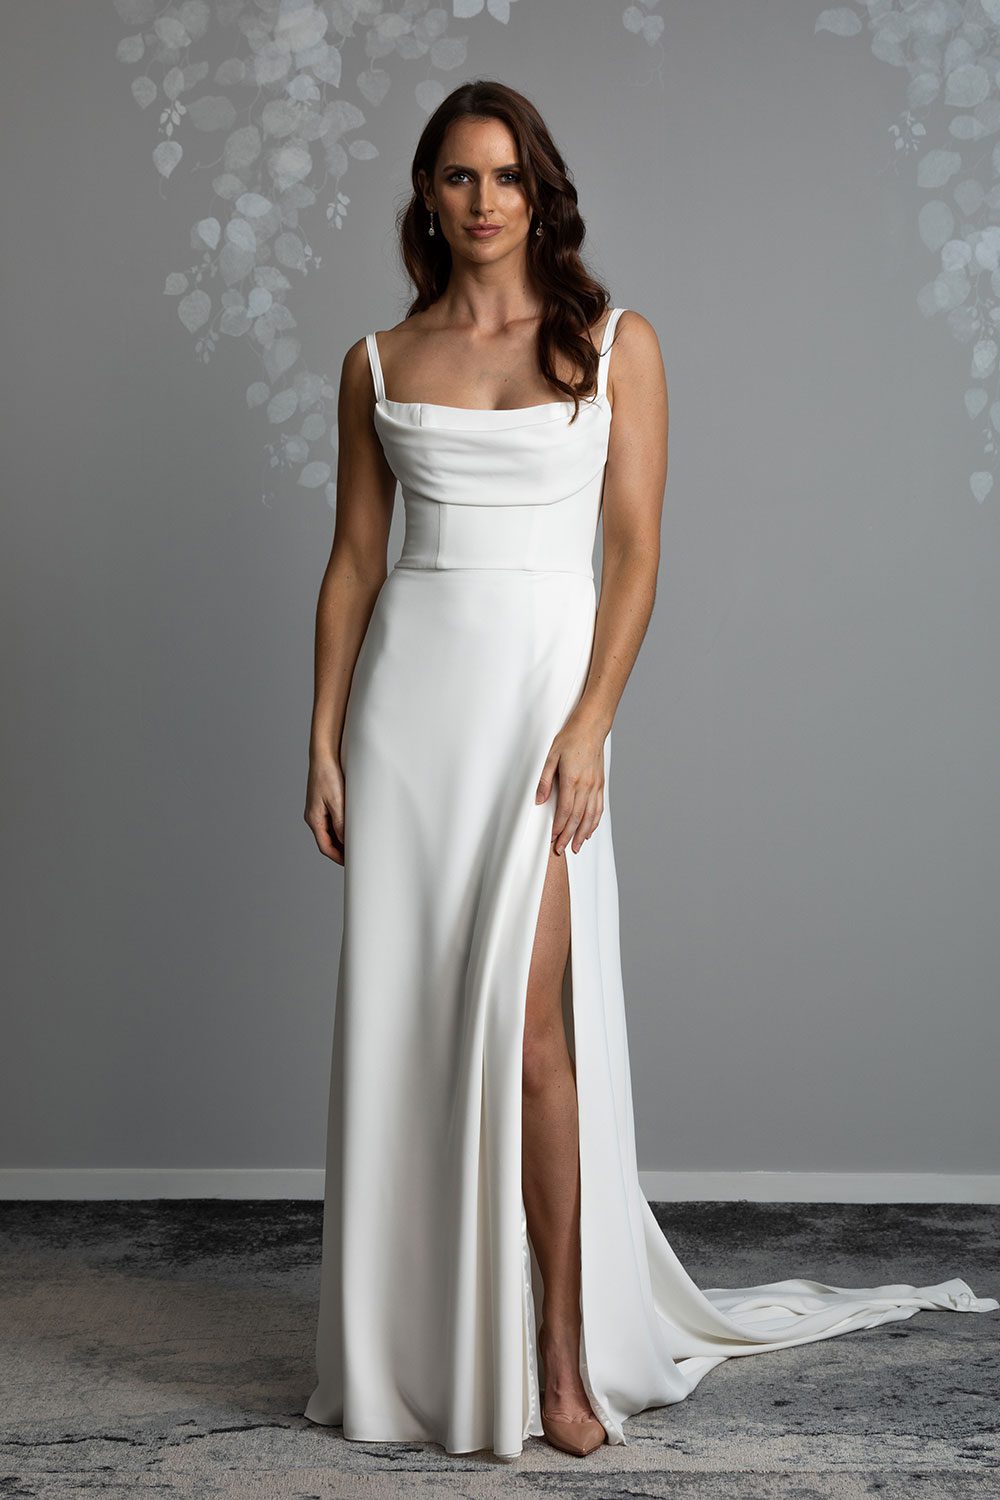 Evelyn Wedding Dress from Vinka Design. A divine gown made in a soft bridal crepe. It has a fitted bodice with soft draping over the bust line to flatter and enhance the figure. The straps compliment this detail by giving the bodice a softened square neckline. The skirt elegantly falls in folds from the side, revealing a flirtatious side split while in motion that falls closed again when still. Full length view of model wearing stunning gown with fitted bodice with draping at the bust and long bridal crepe skirt with side split and lengthy train